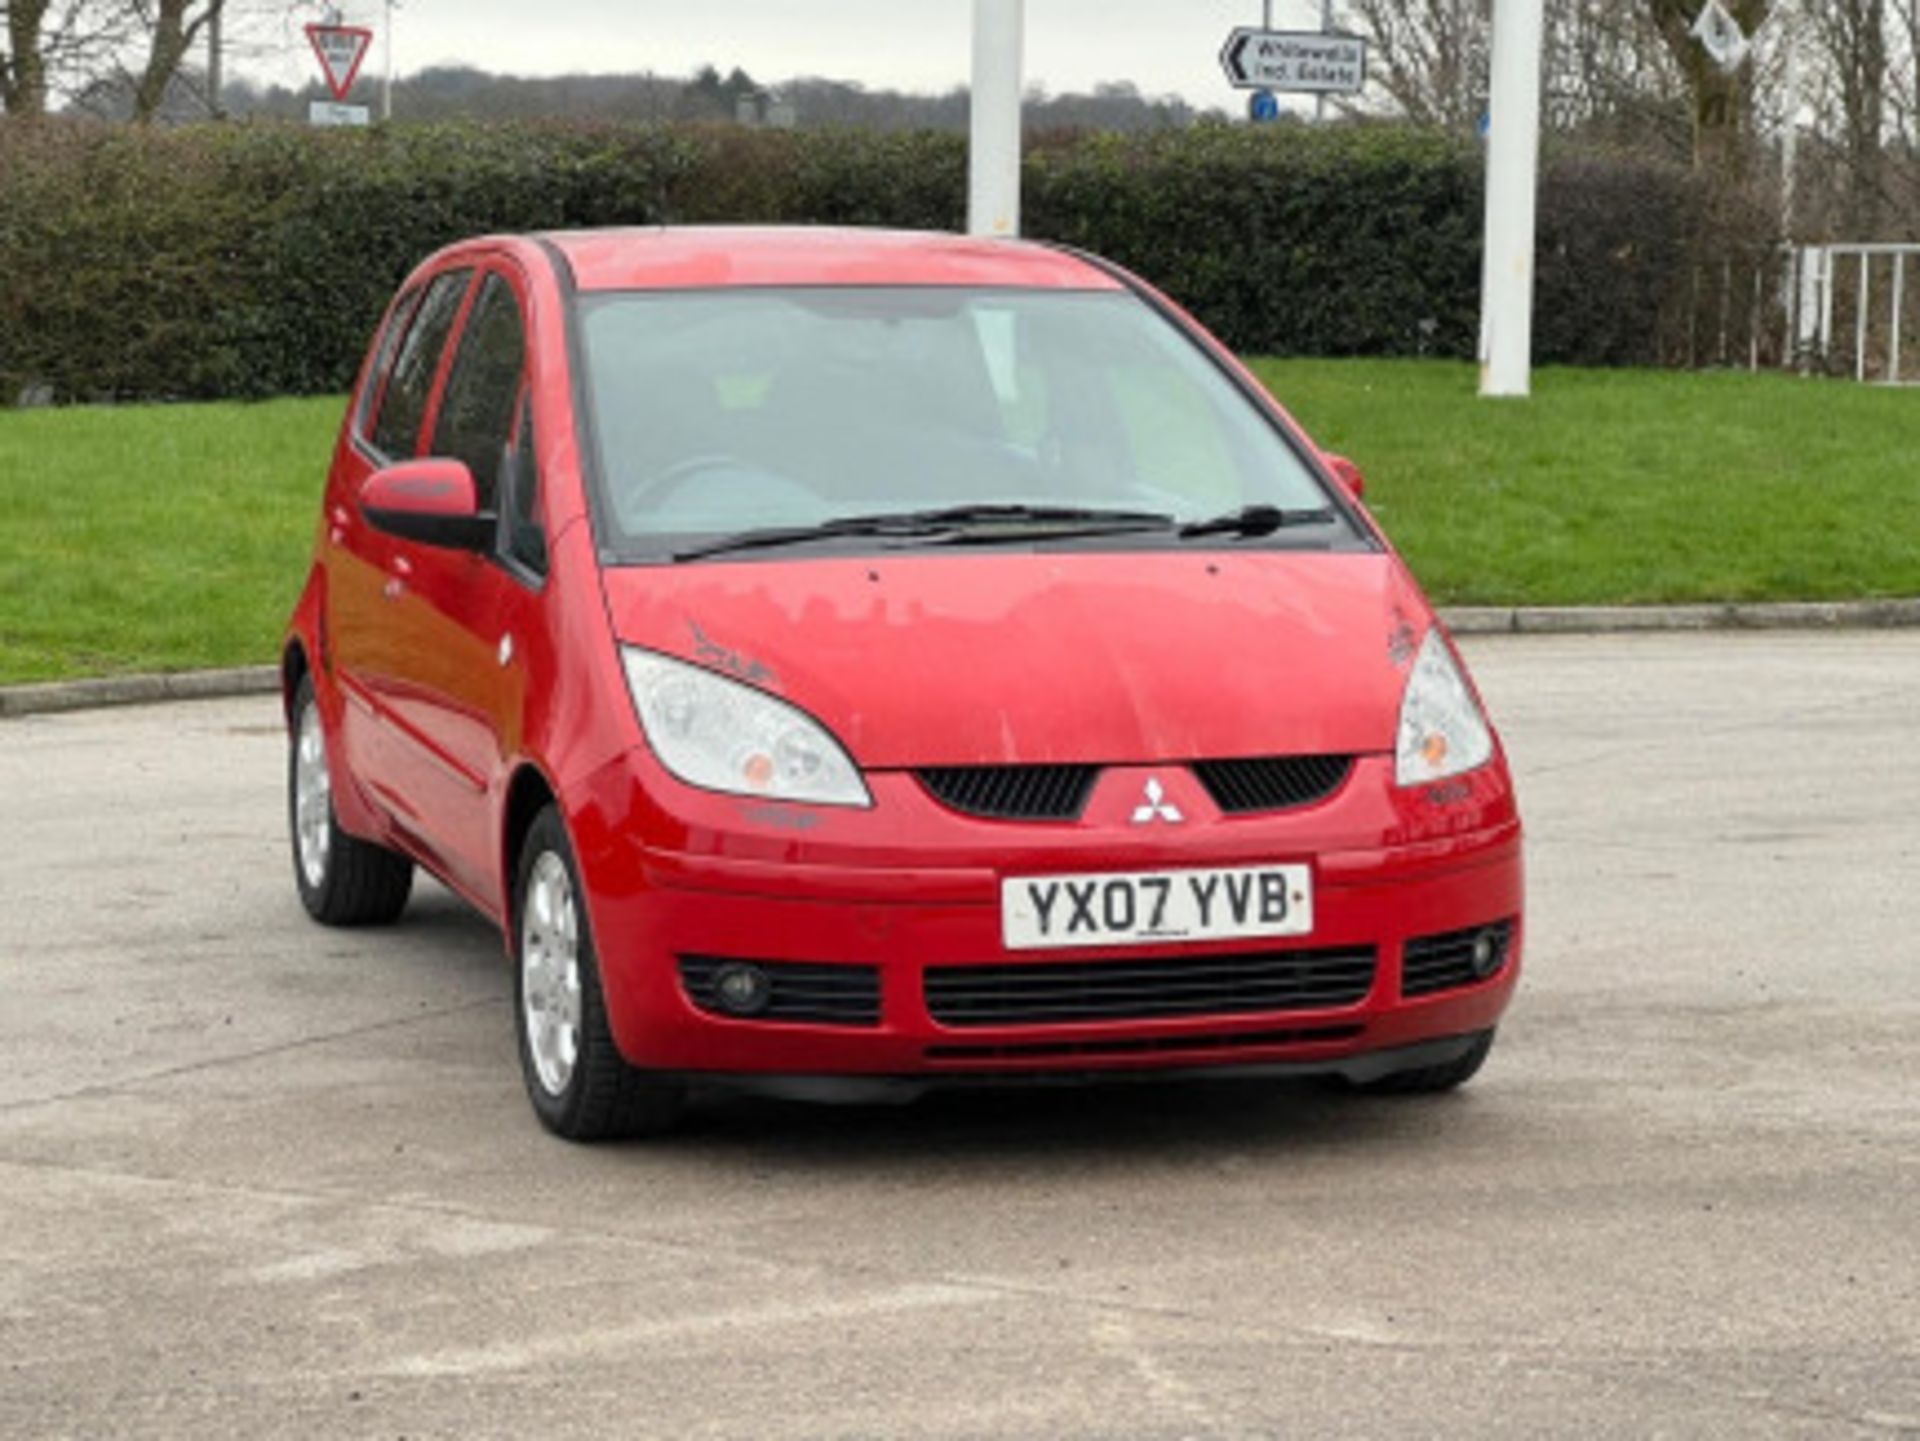 2007 MITSUBISHI COLT 1.5 DI-D DIESEL AUTOMATIC >>--NO VAT ON HAMMER--<< - Image 22 of 191